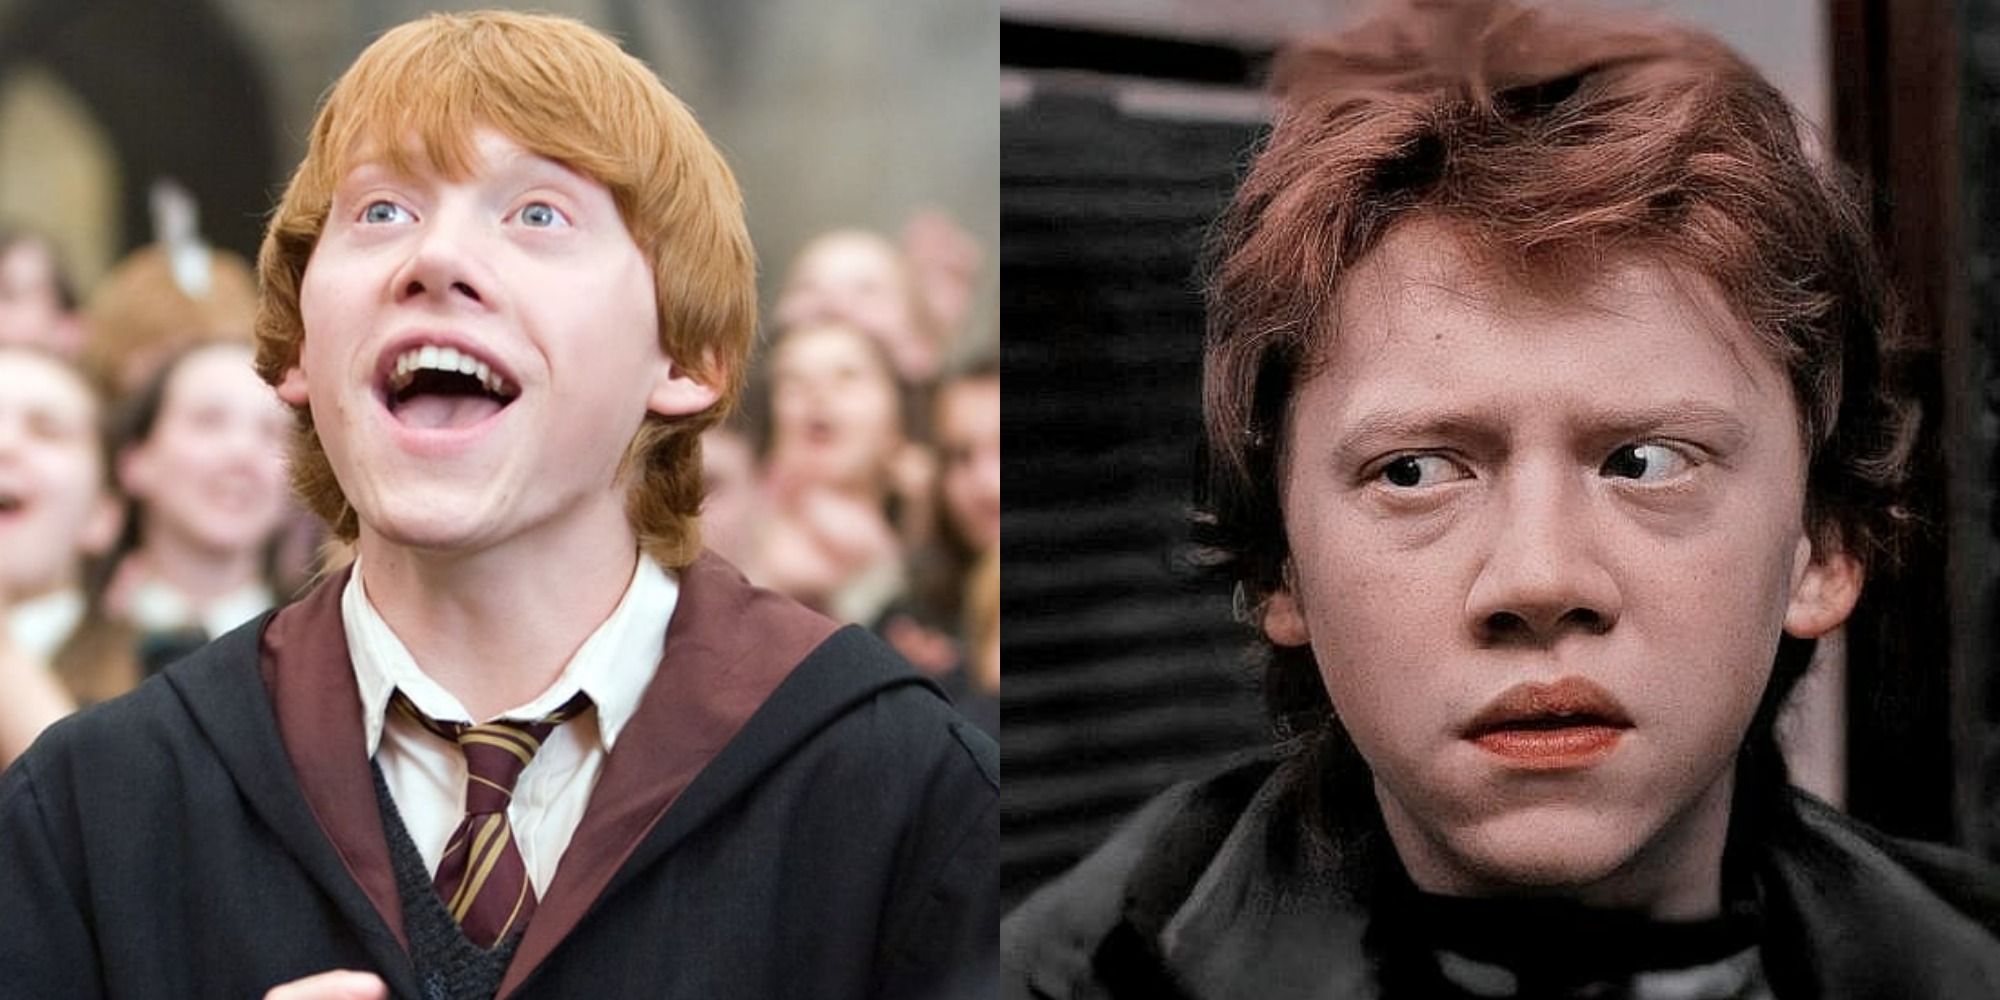 Ron Weasley™, from the Harry Potter™ movies